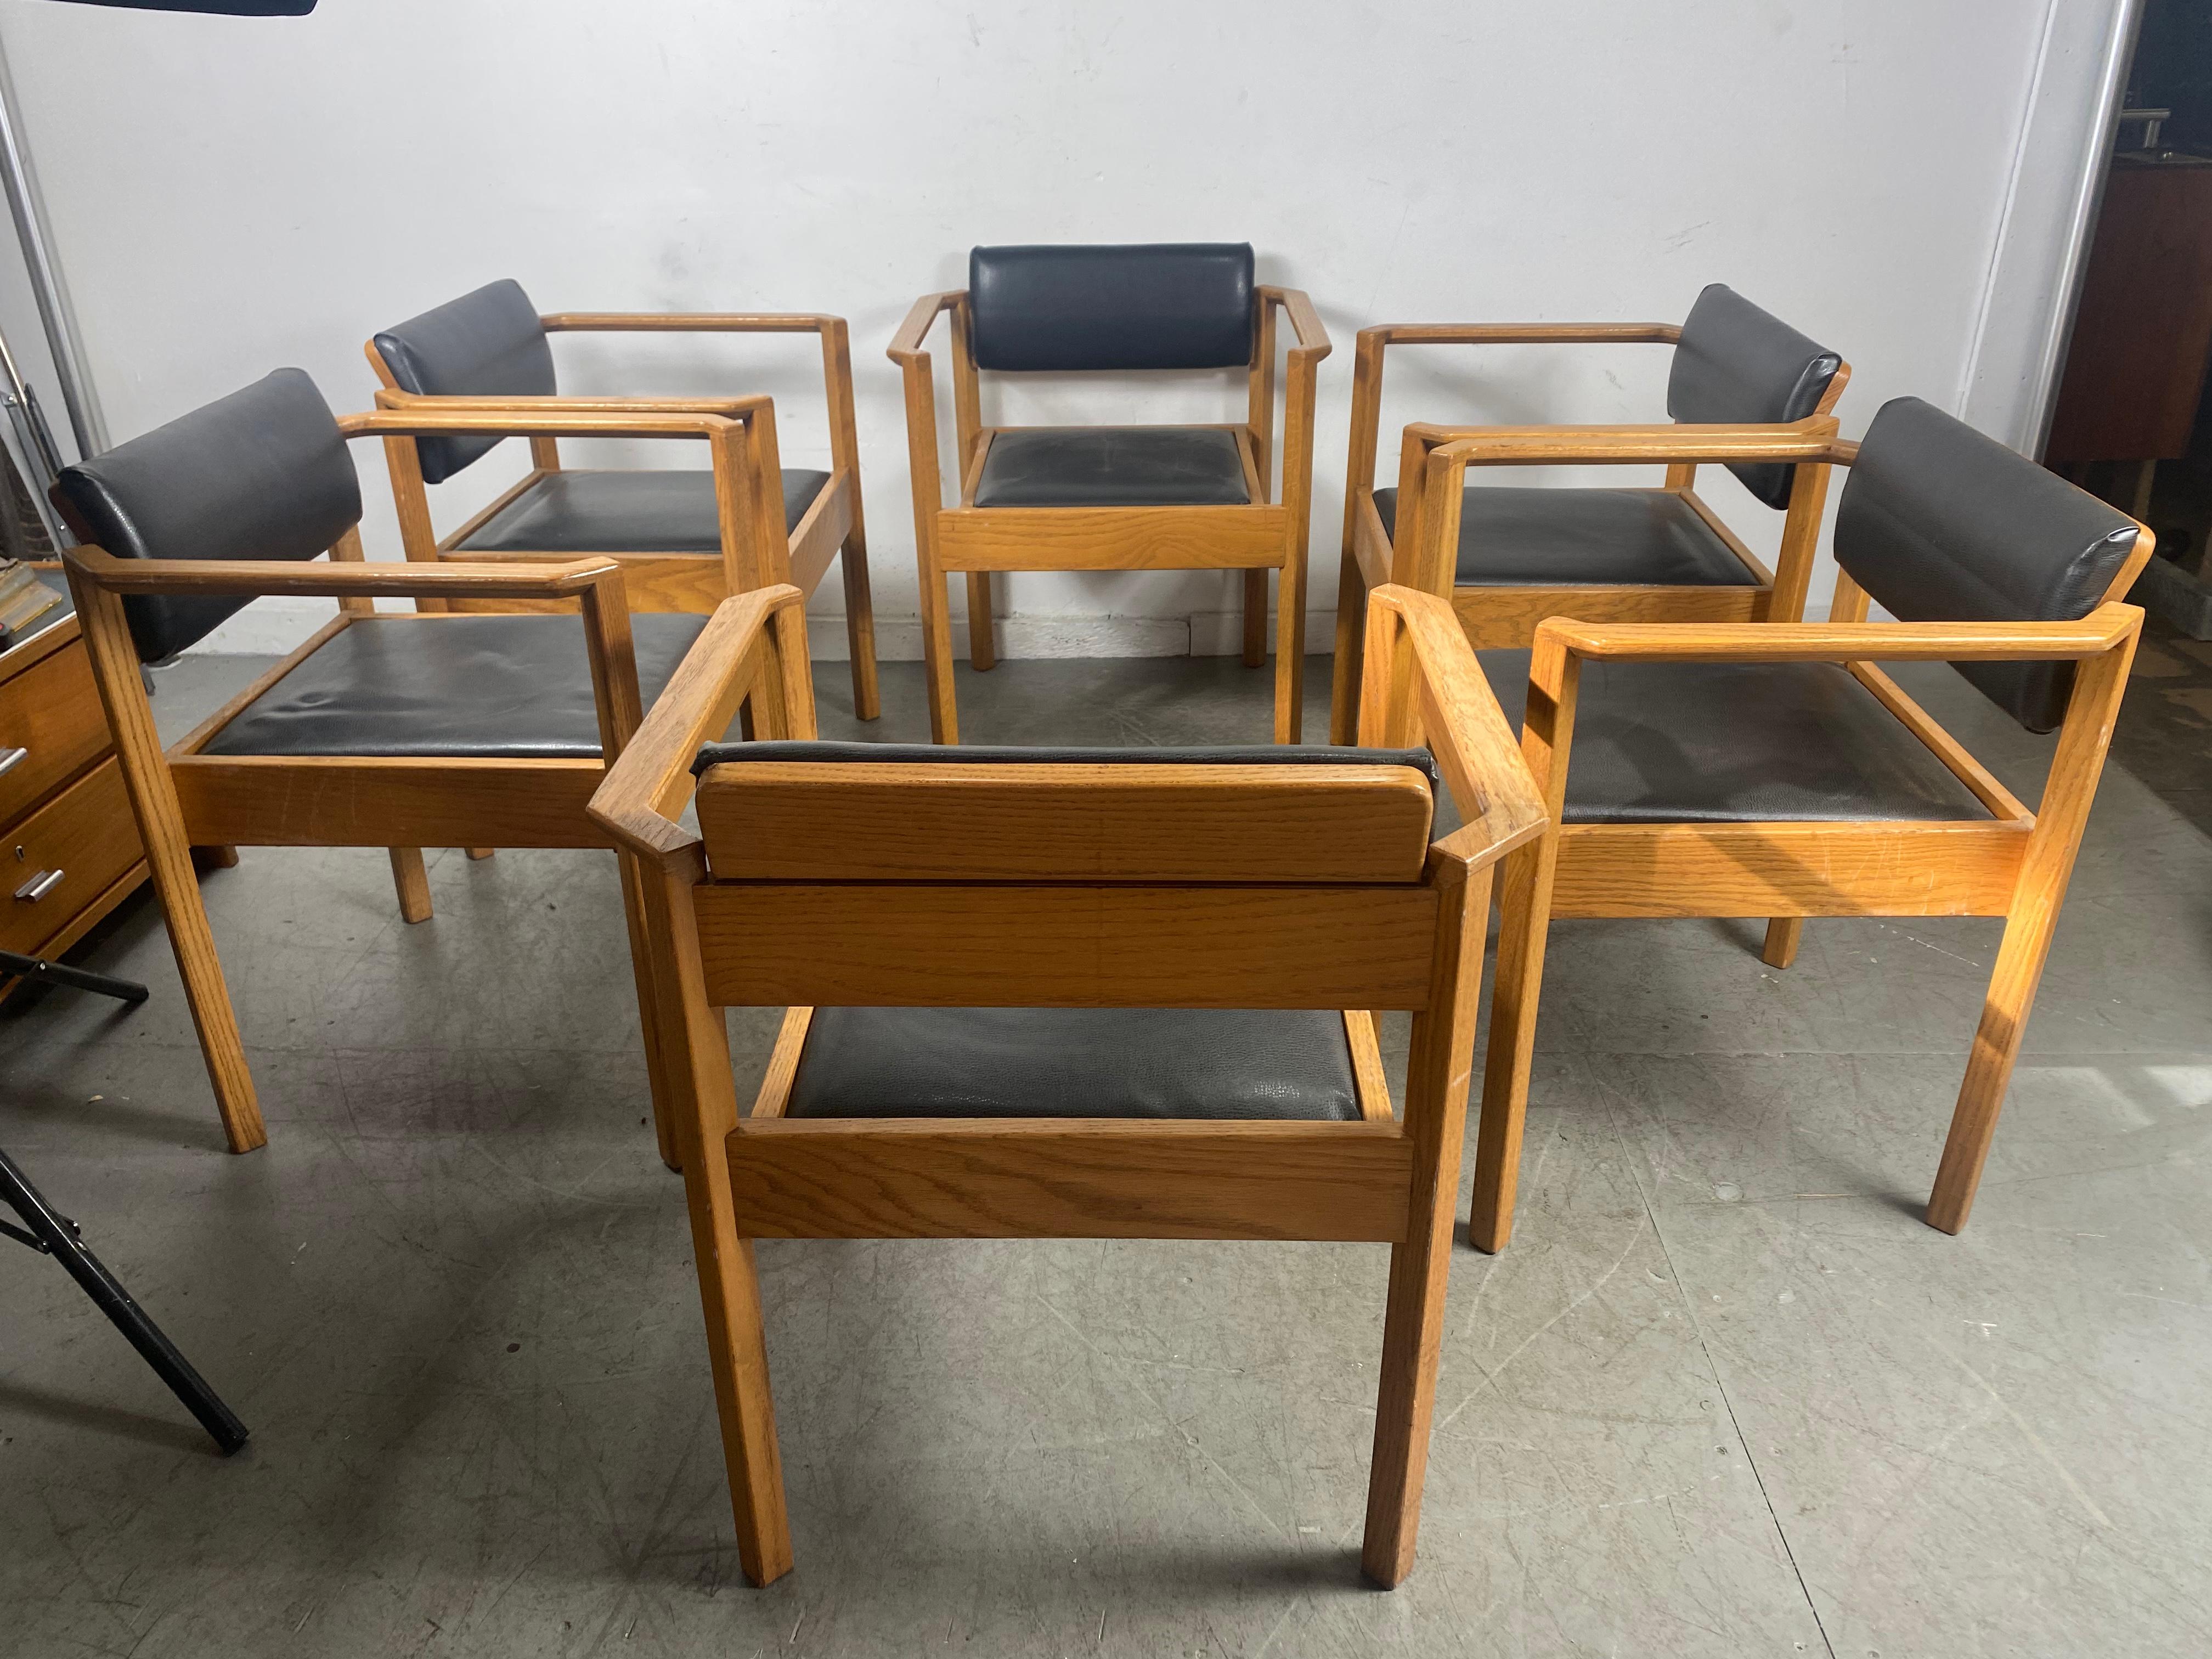 Unusual set of 6 architectural stacking arm chairs / dining / conference, amazing design, manner of frank Lloyd Wright. Superior quality and construction, oak frames retains original color, finish, patina. Seats reupholstered in leather, solid